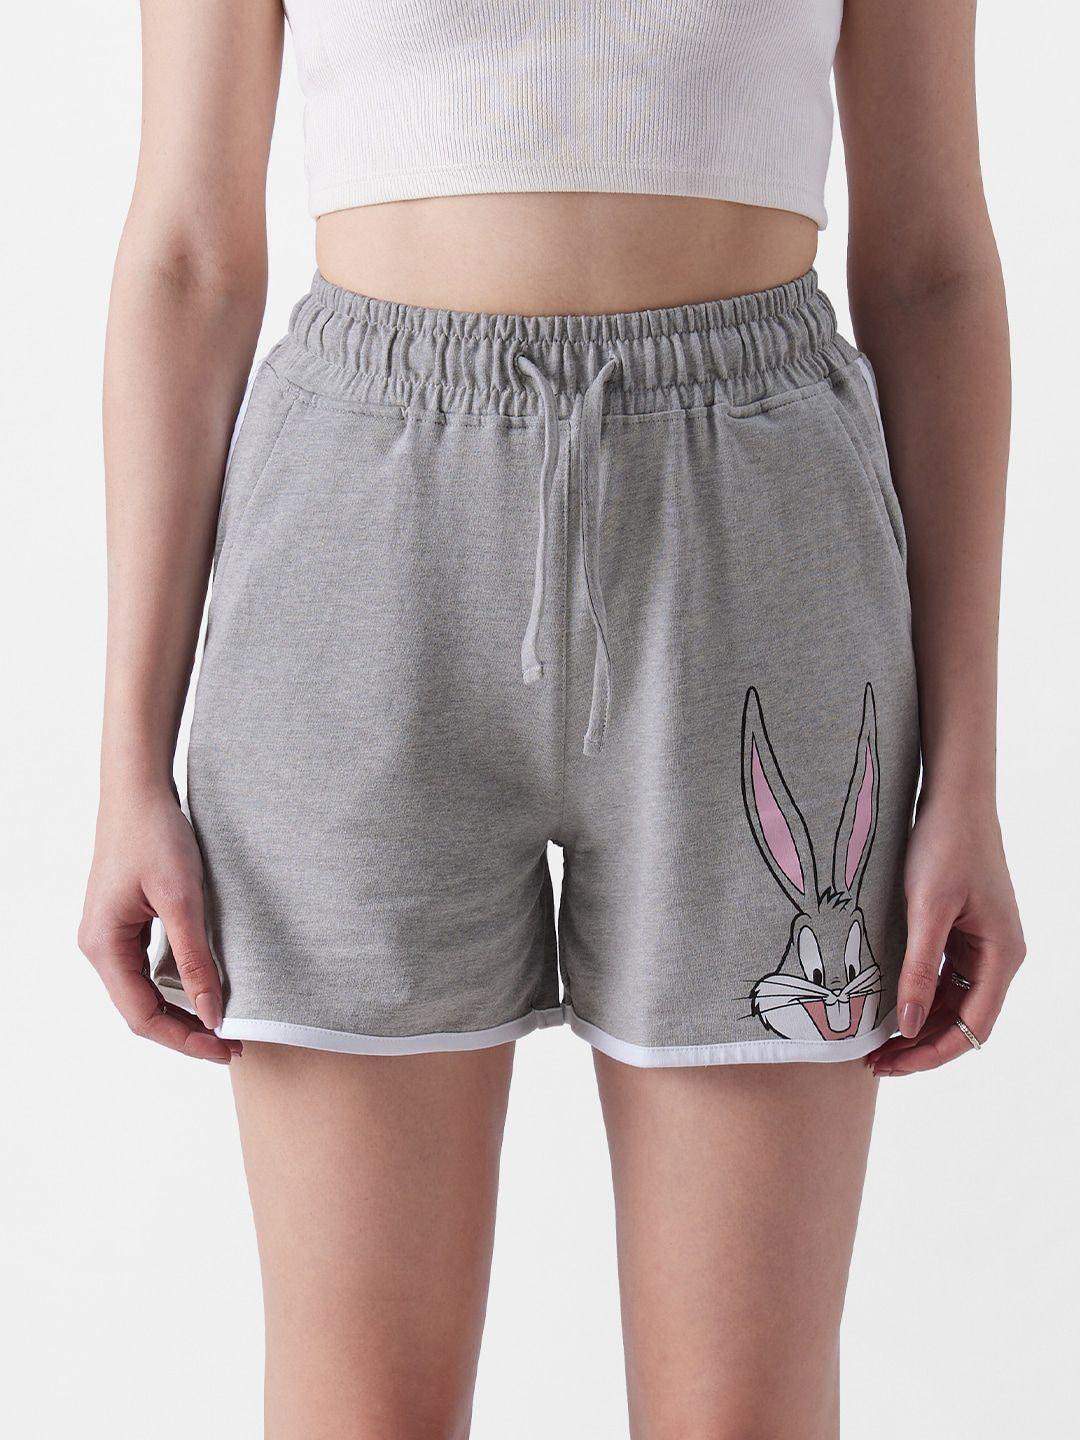 the souled store women bugs bunny printed shorts